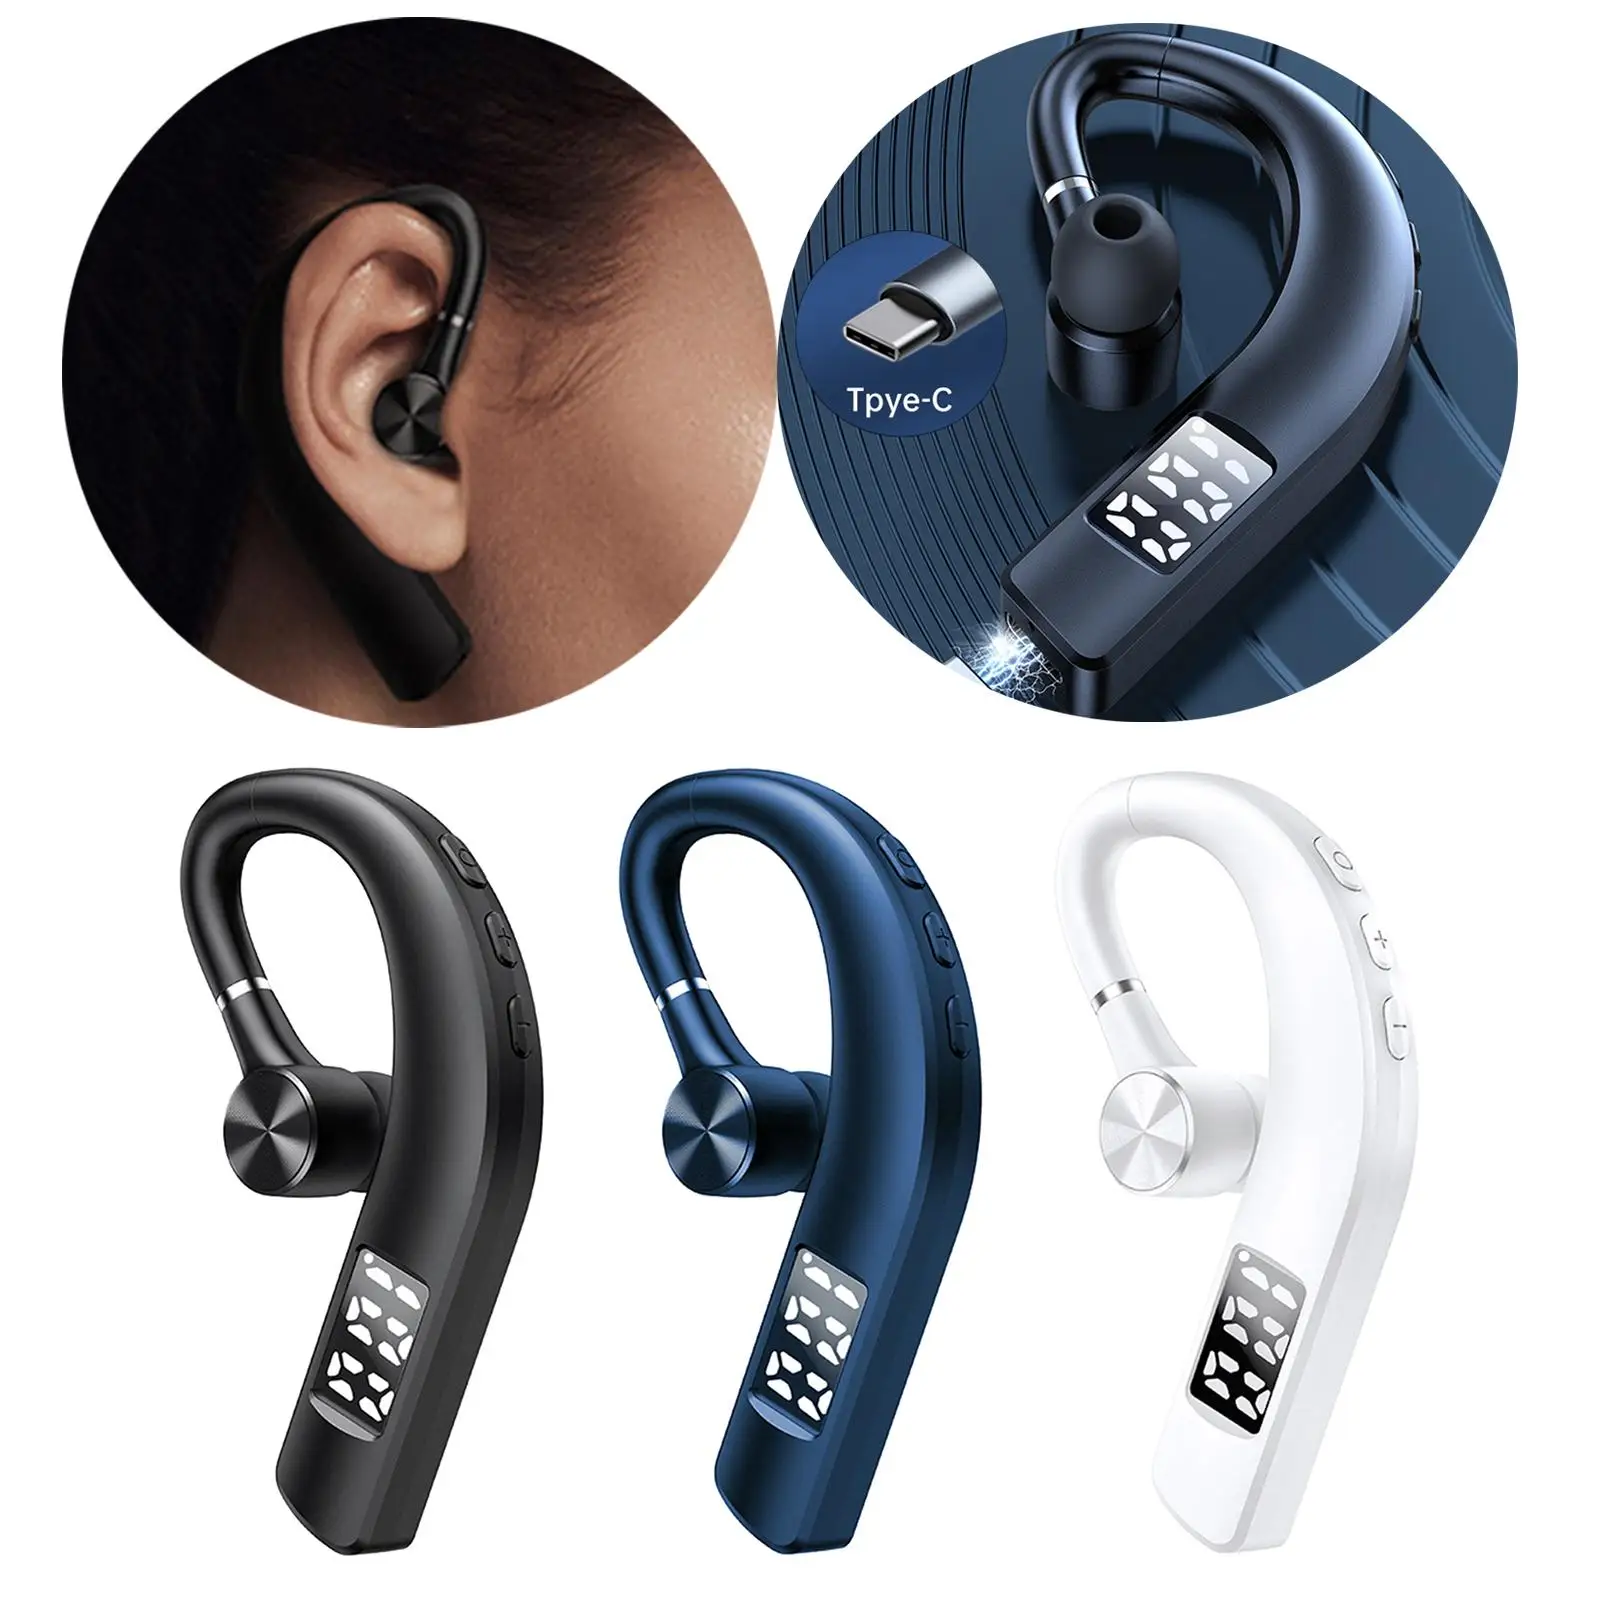 Bluetooth Headset Ear Hook Built-In HD Microphone HD Calling for Business